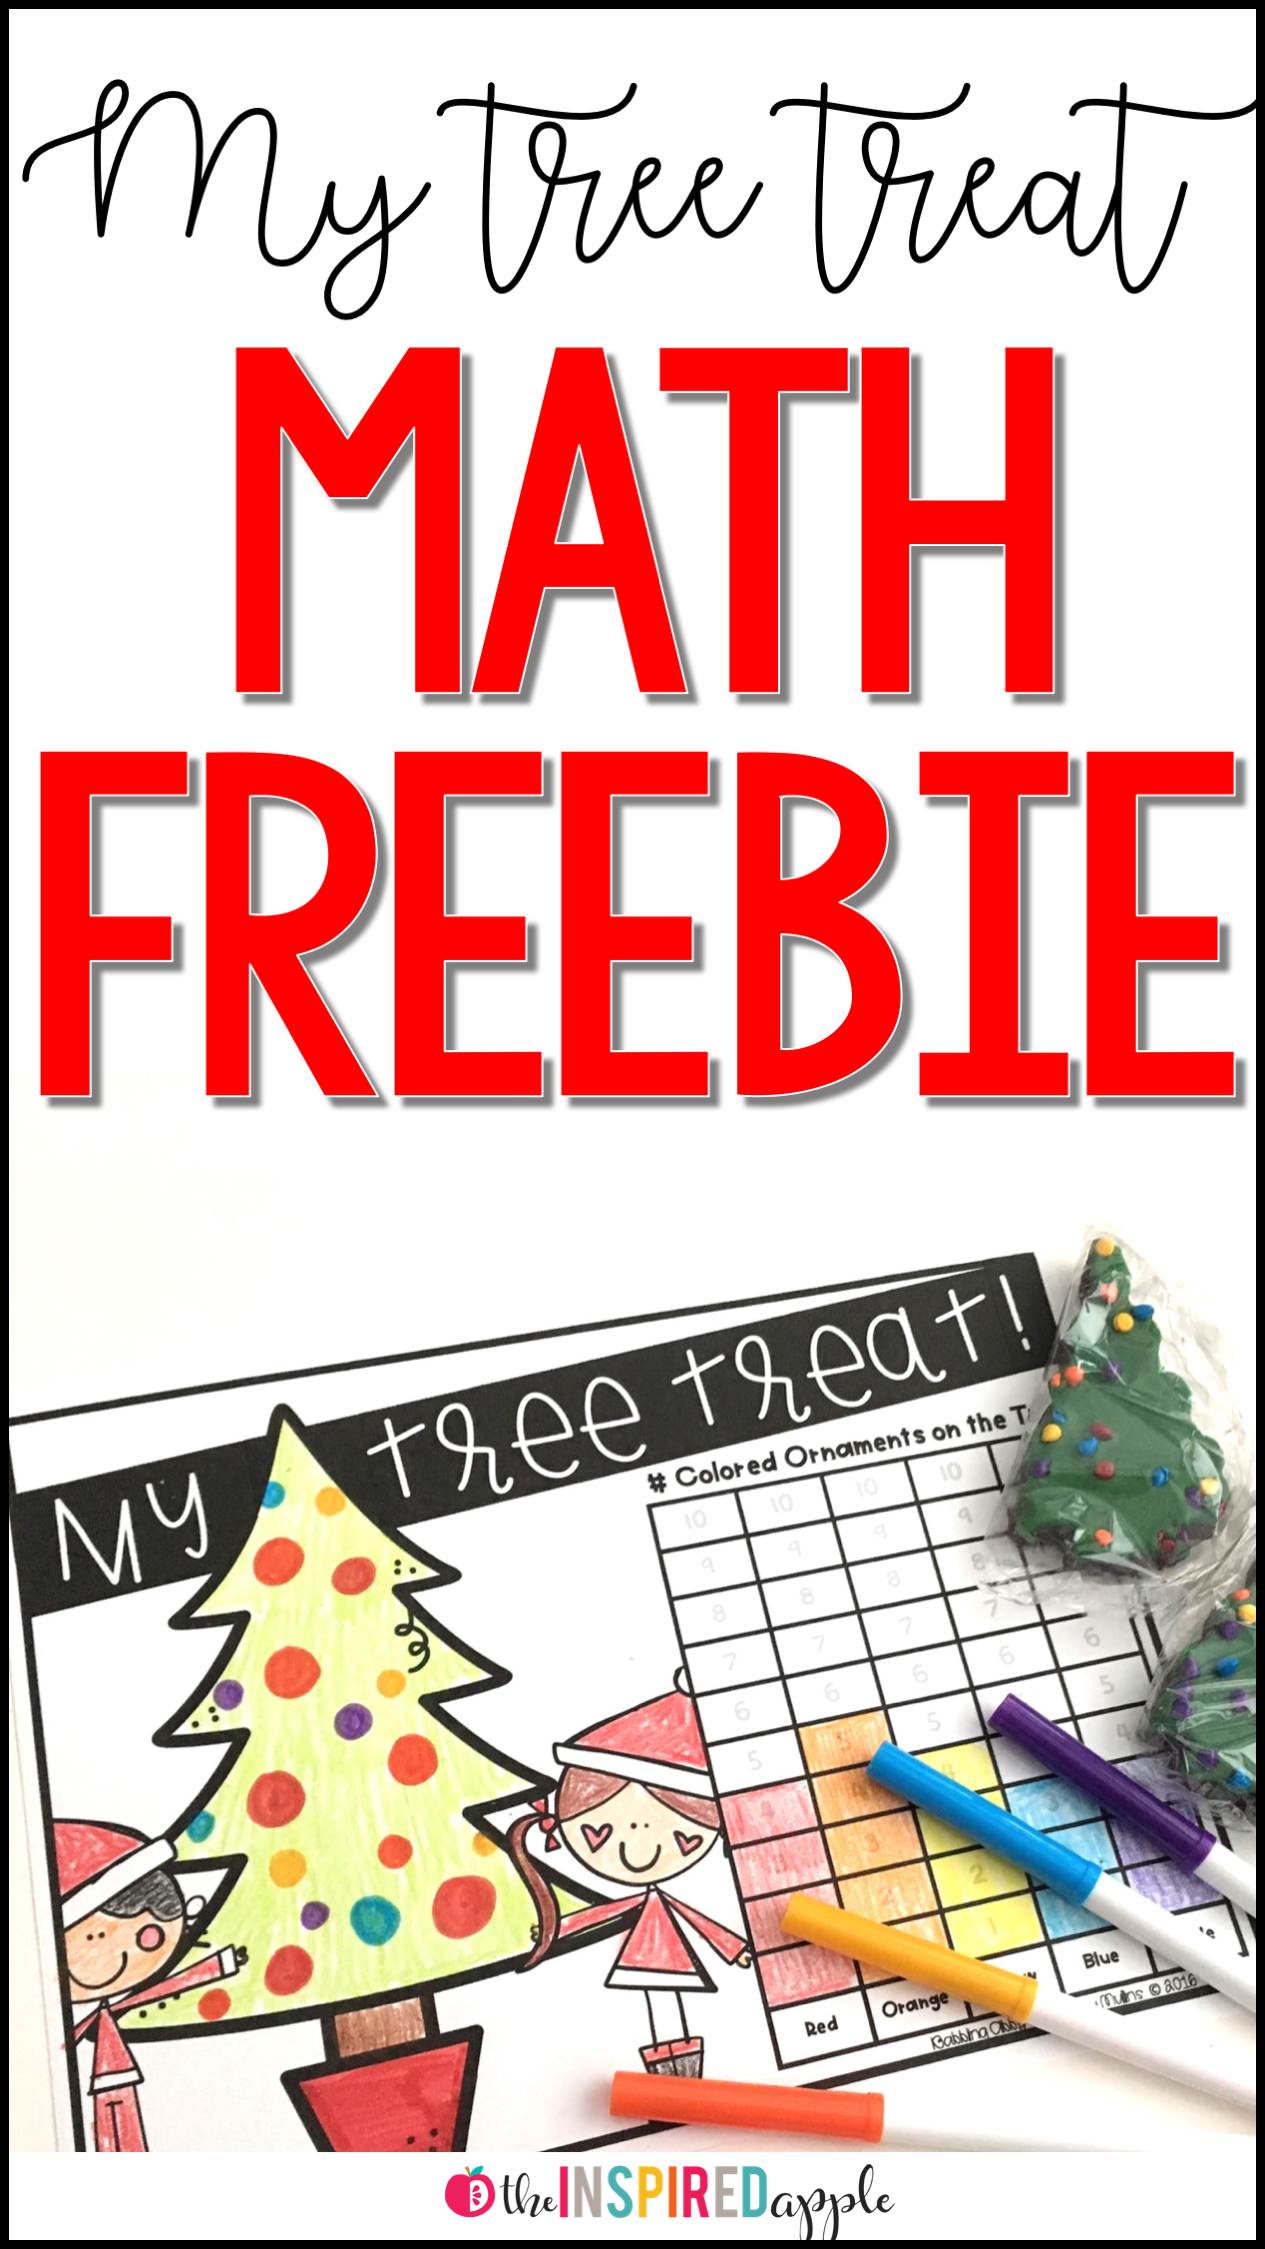 A fun, FREE Christmas tree graphing activity! It's perfect for adding into your math activities during the holidays in the month of December! Your kindergarten, first grade, and even second grade kiddos will love it!